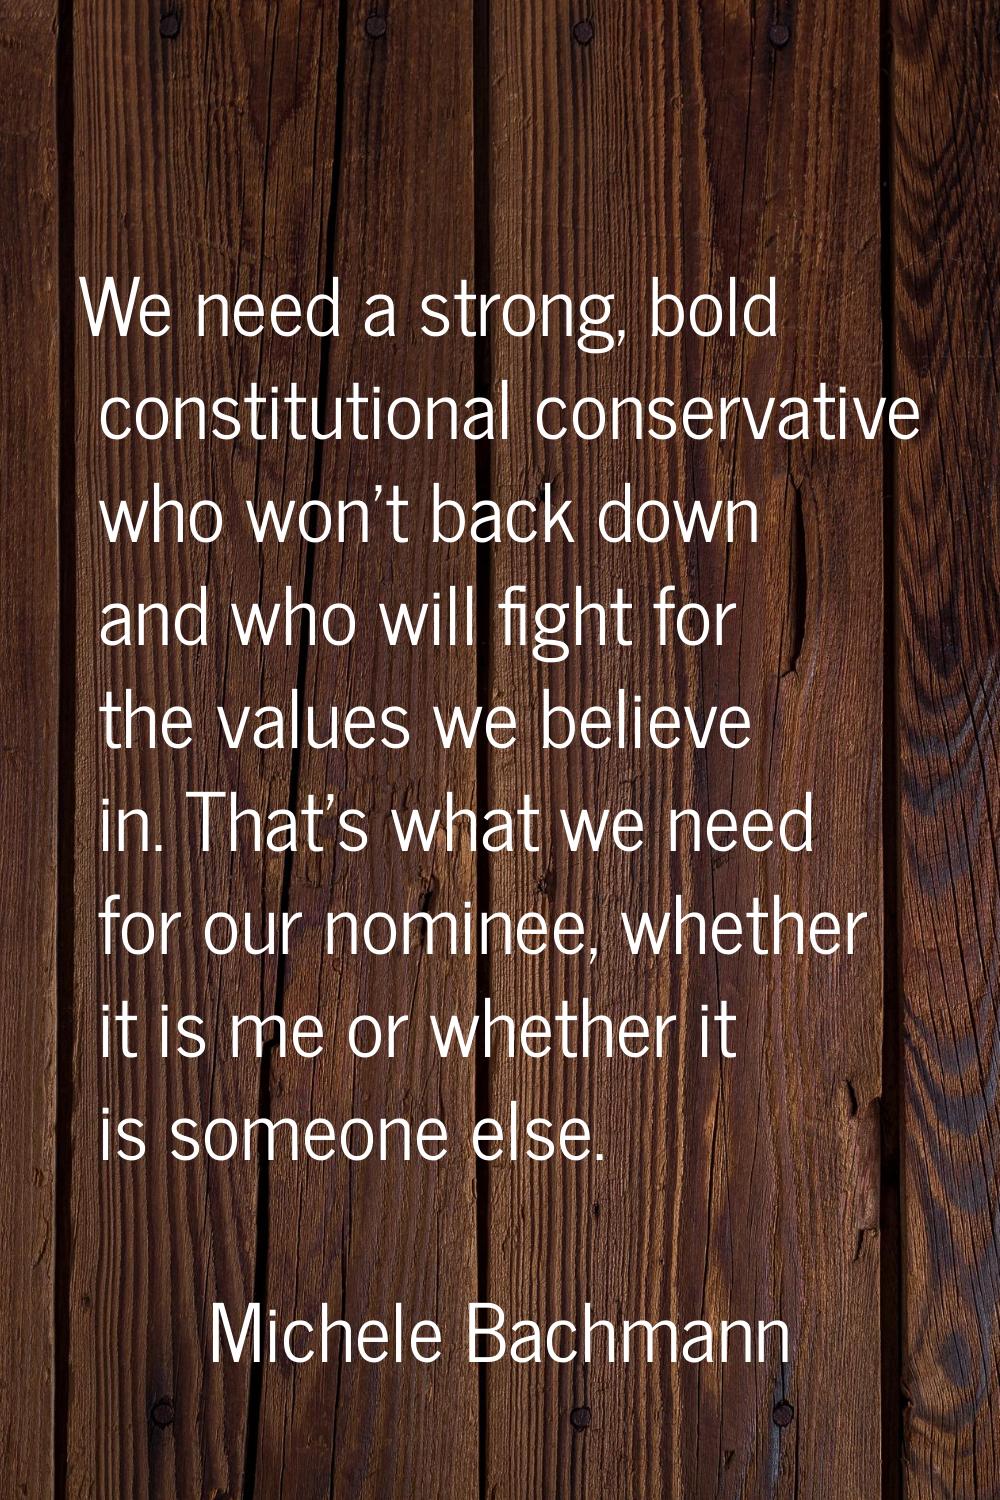 We need a strong, bold constitutional conservative who won't back down and who will fight for the v